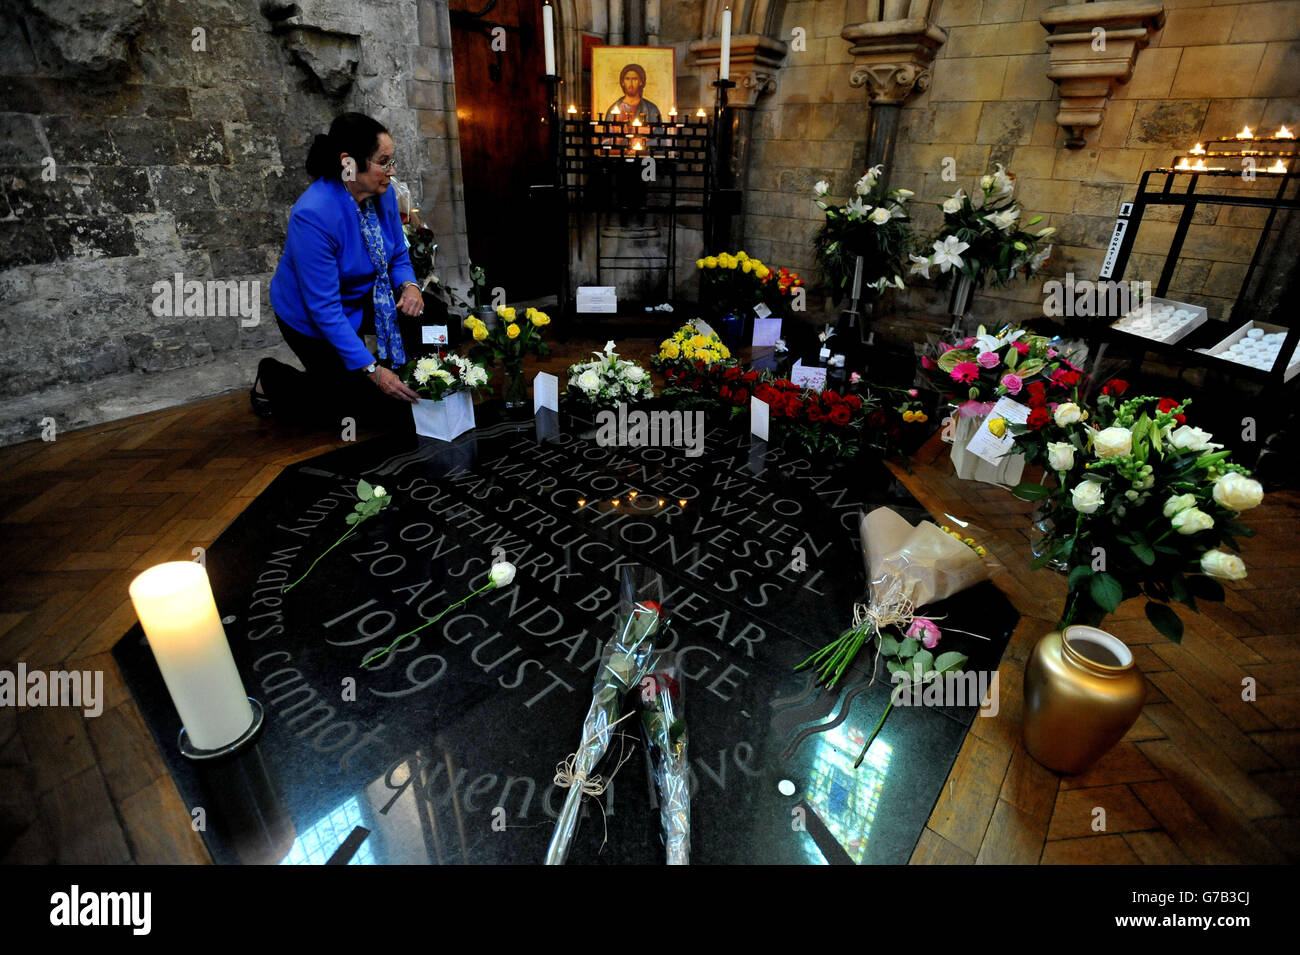 Margaret Lockwood Croft, who lost her 26 year-old son Shaun Lockwood Croft , in the Marchioness disaster on the River Thames, looks at flowers left on the memorial following a service at Southwark Cathedral, Southwark, south London, to mark the 25th anniversary of the sinking of the pleasure cruiser on the River Thames in London, which claimed 51 lives when the craft was hit by the Bowbelle Thames dredger. Stock Photo